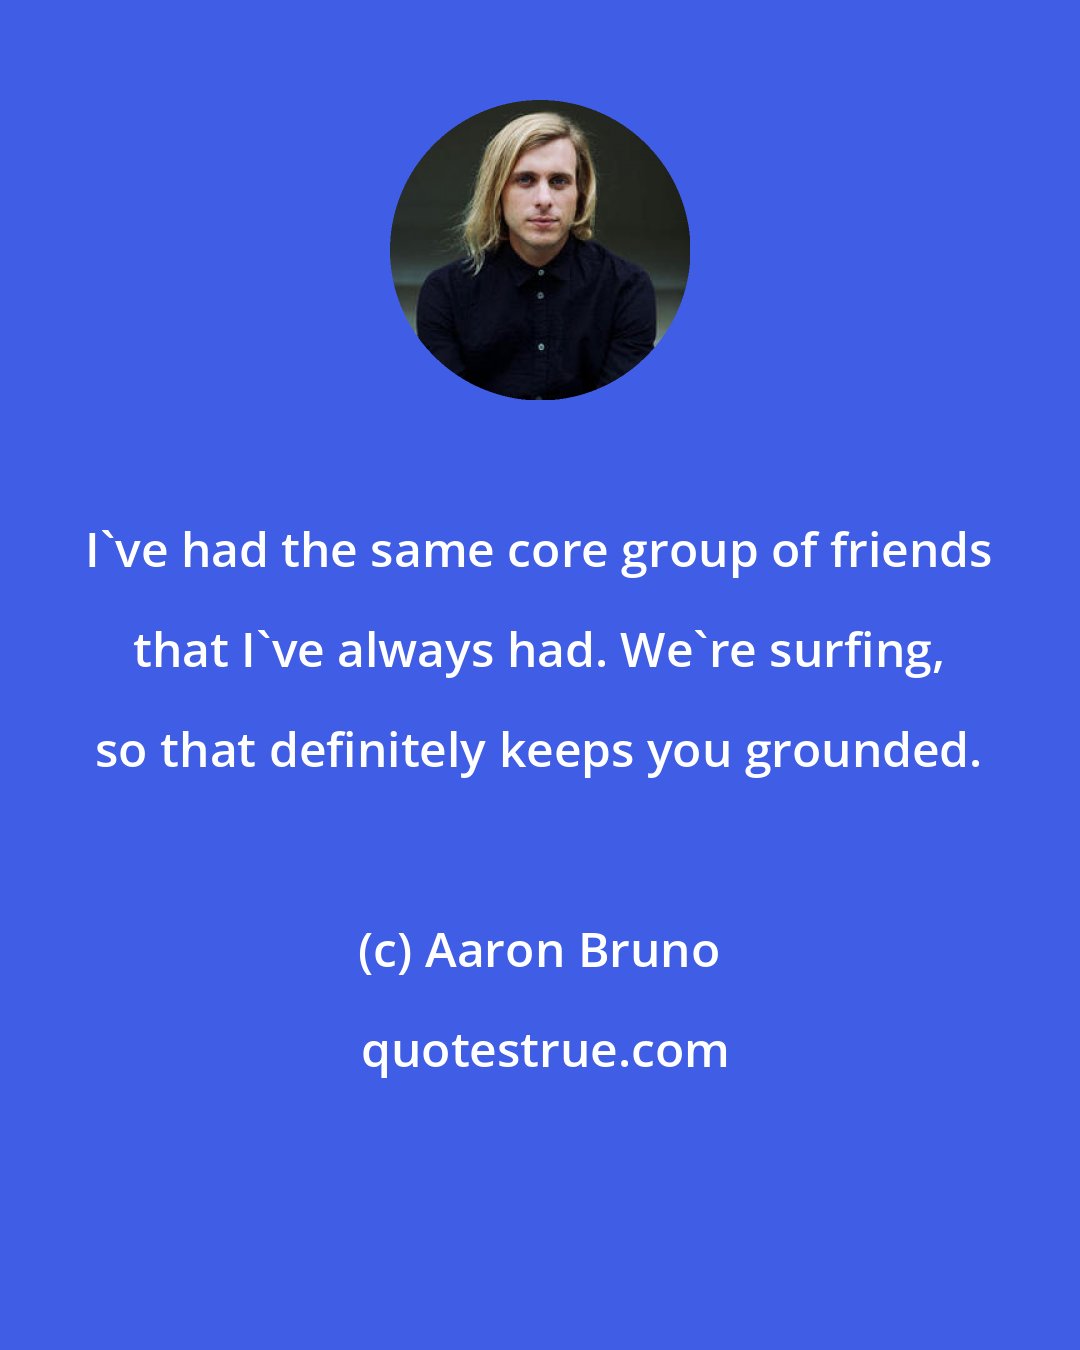 Aaron Bruno: I've had the same core group of friends that I've always had. We're surfing, so that definitely keeps you grounded.